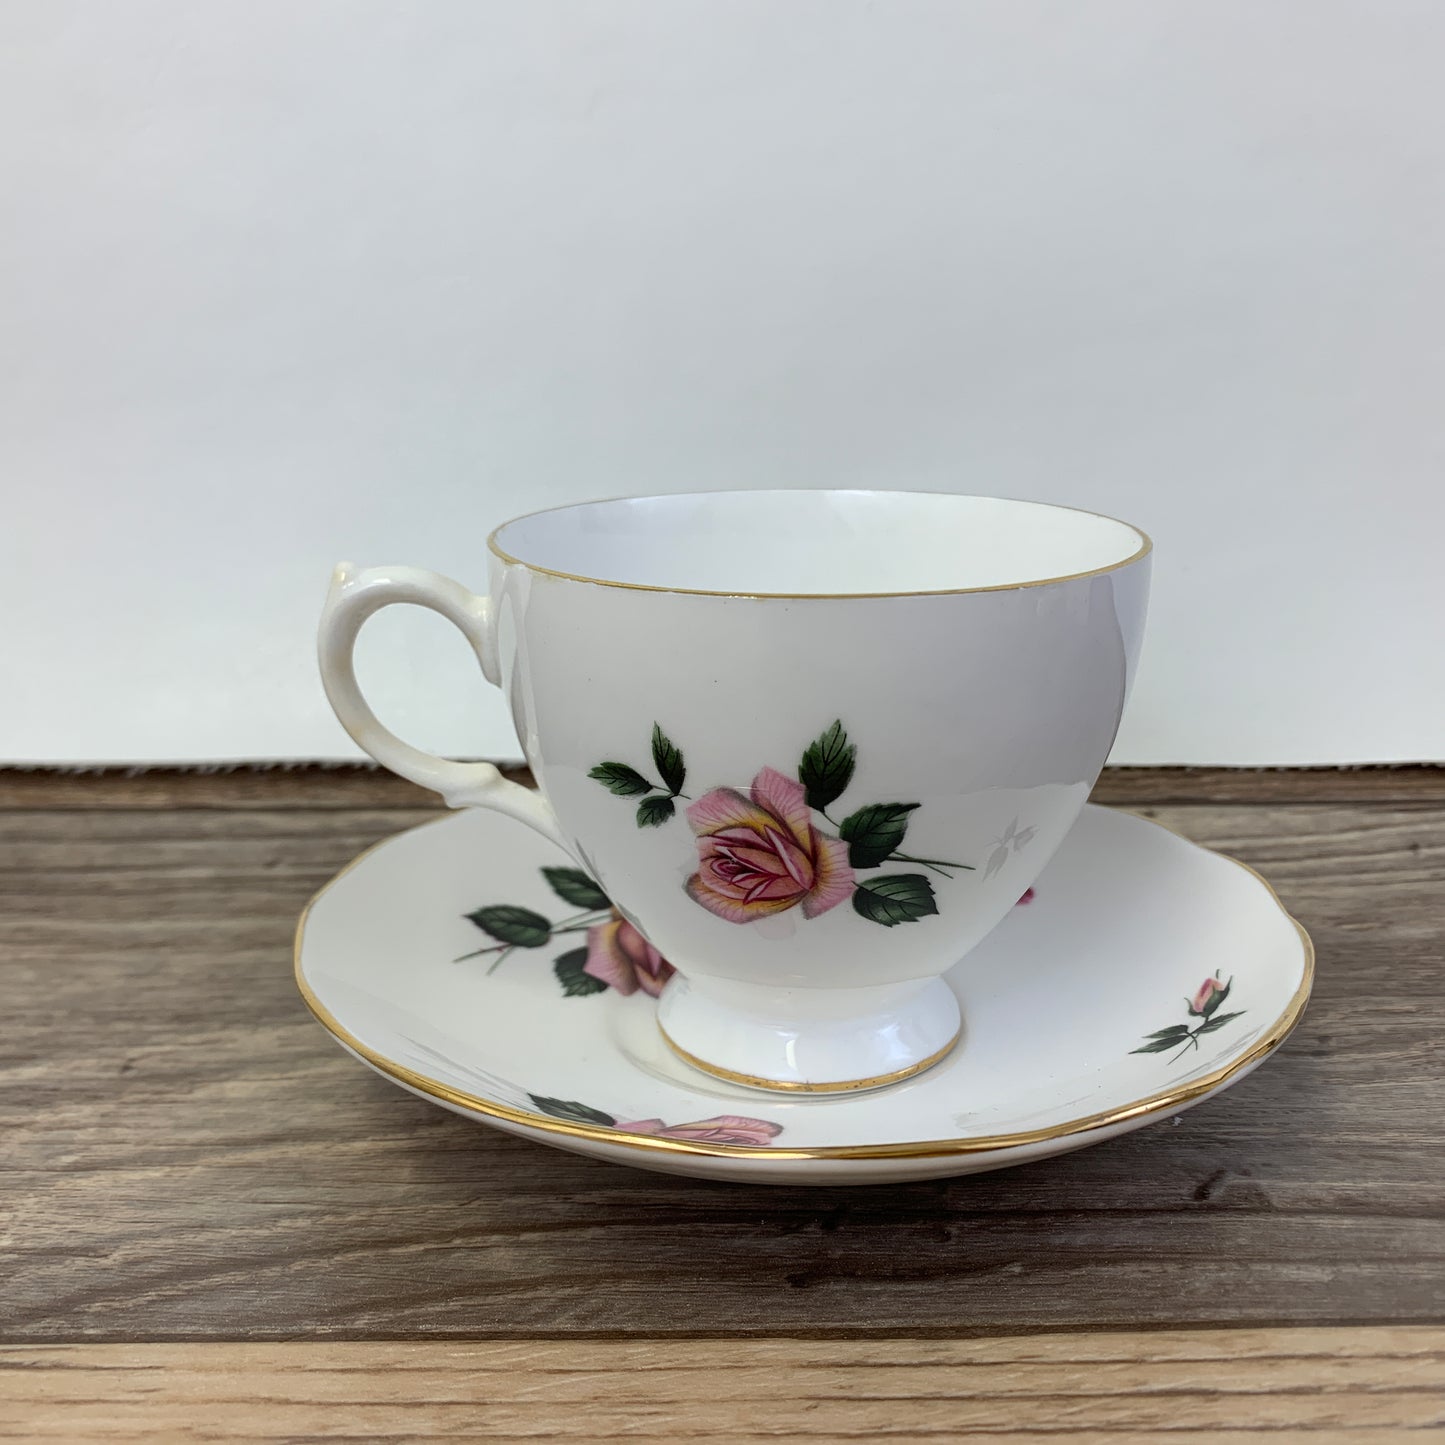 Vintage Floral Teacup with Pink and Red Roses Royal Vale English Teacup